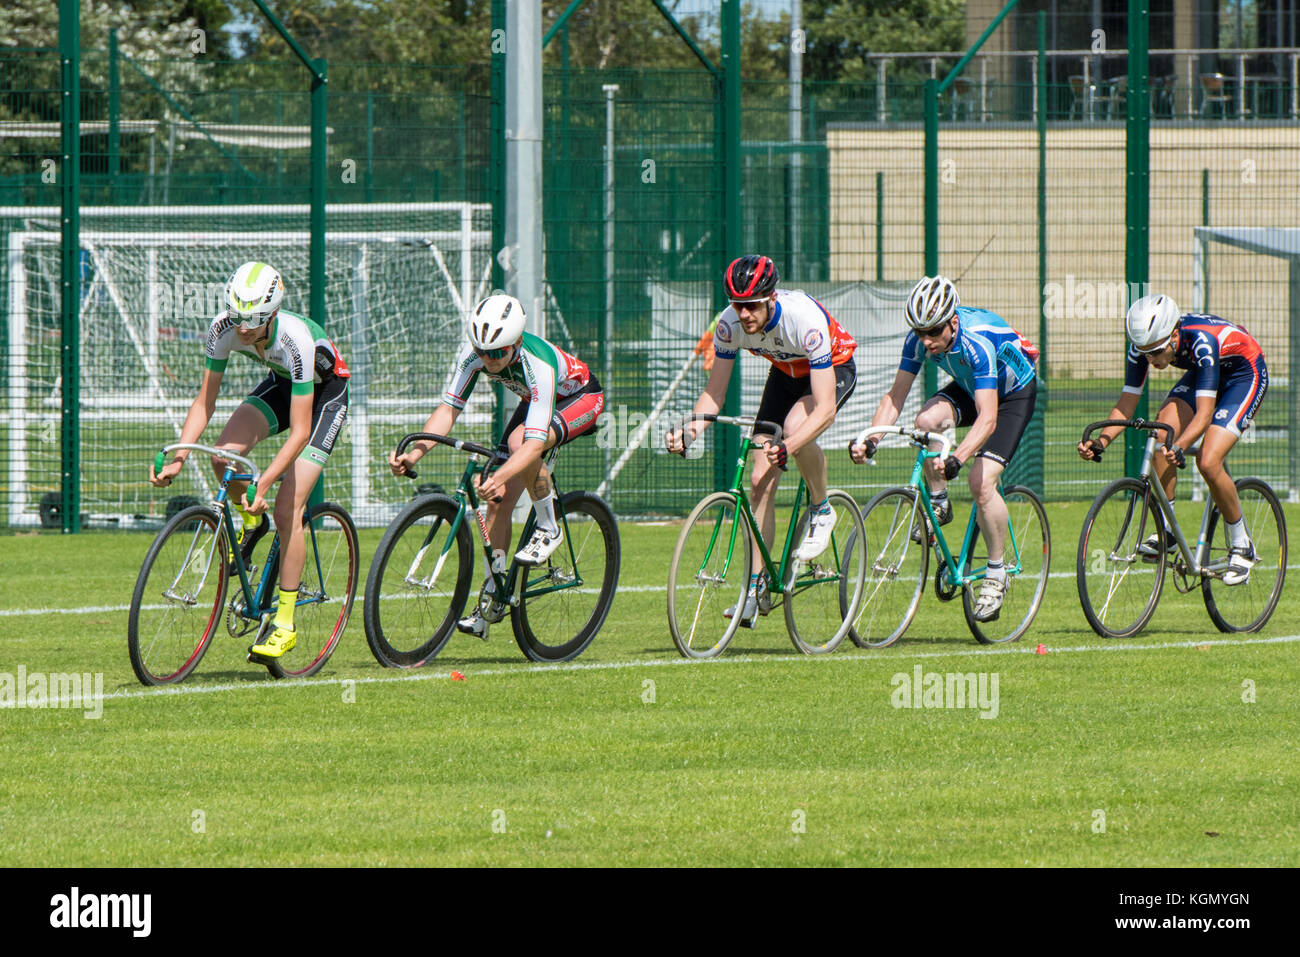 grass track cycling